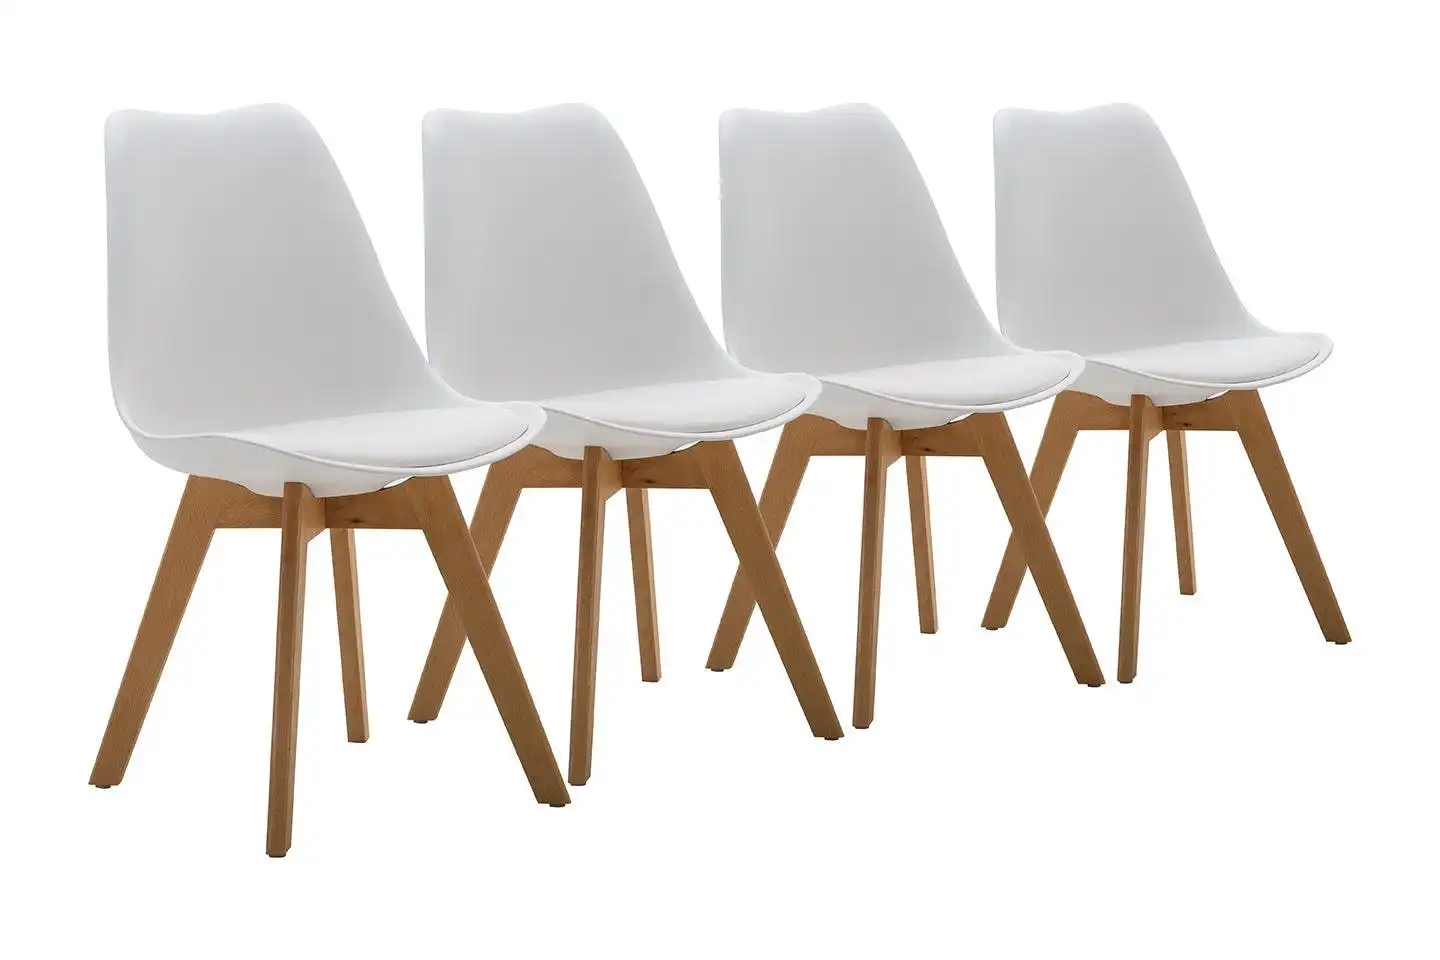 Chotto - Ando Dining Chairs - White x 4